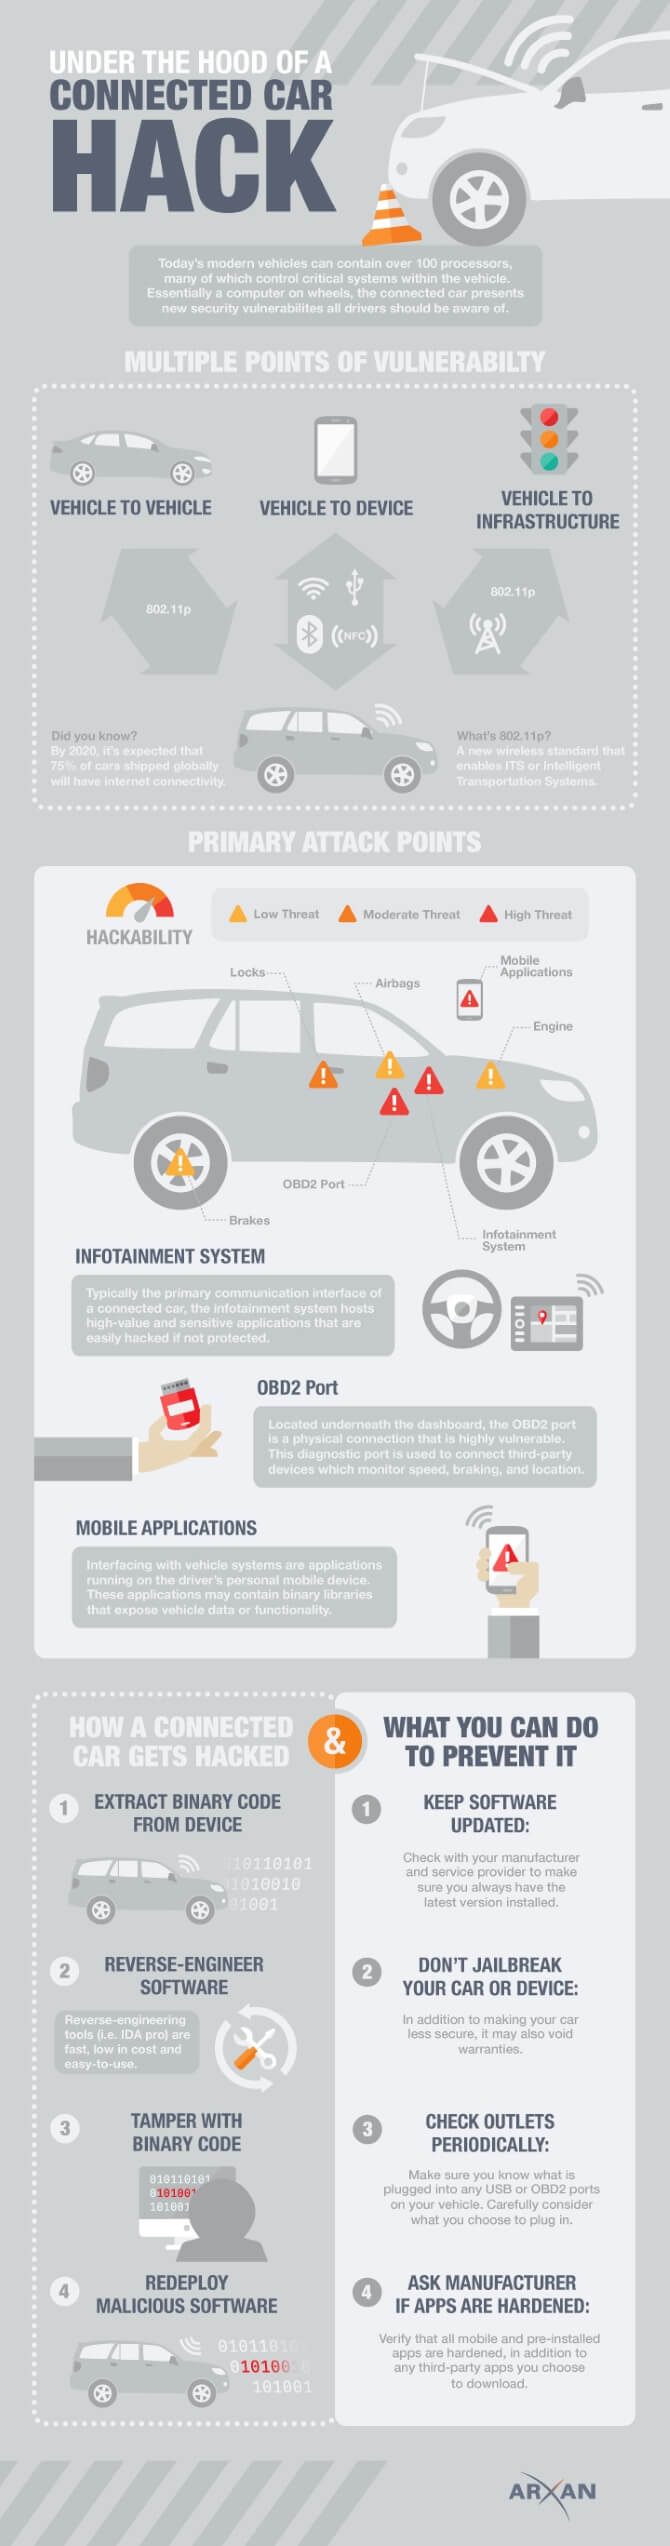 How a Car Hack Attack Is Happening [Infographic]